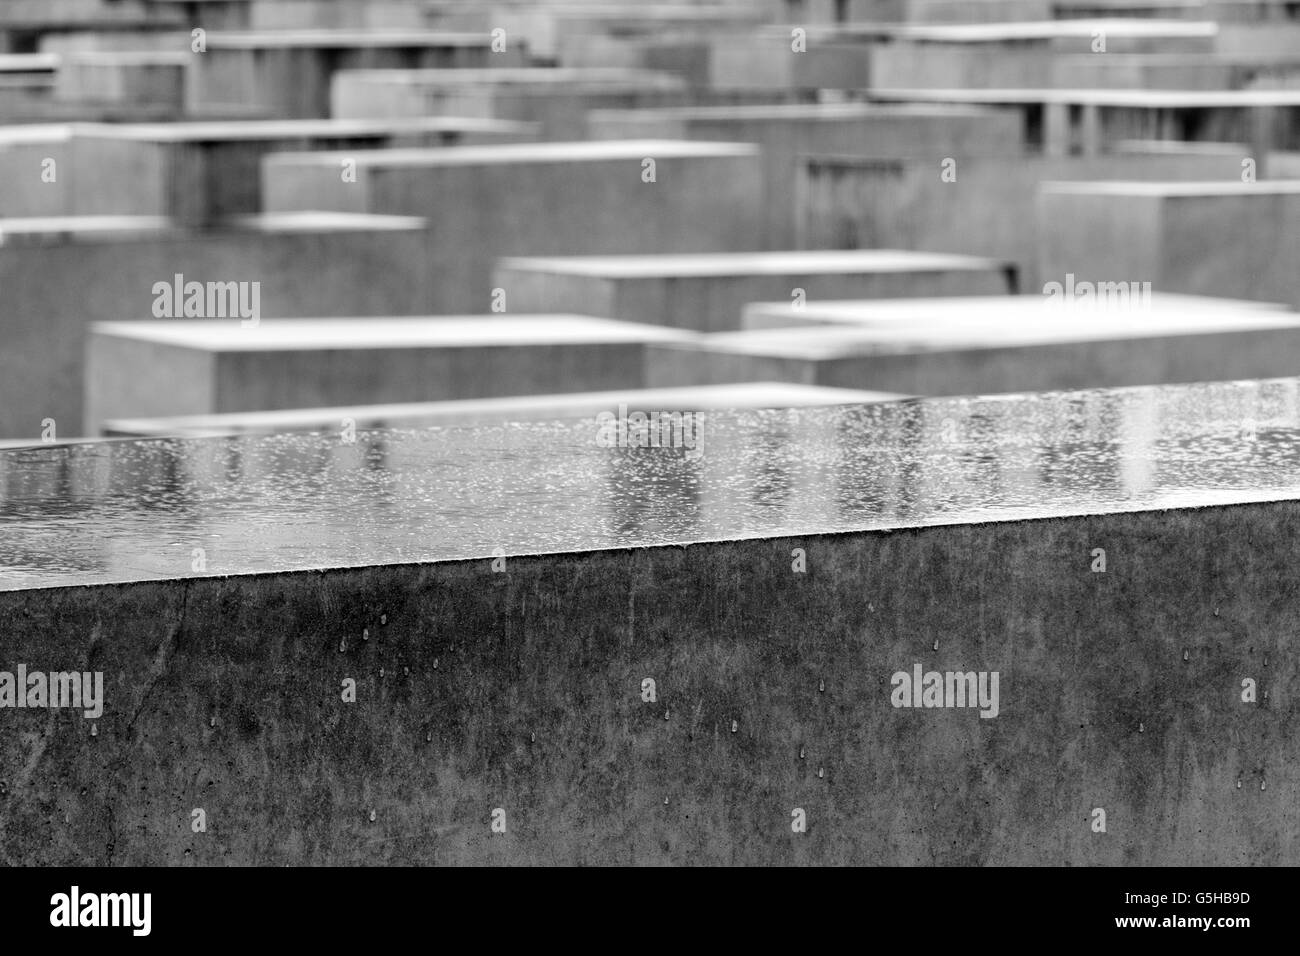 Memorial to the Murdered Jews of Europe or Holocaust Memorial, Berlin, Germany designed by Eisenman and engineer Buro Happold Stock Photo